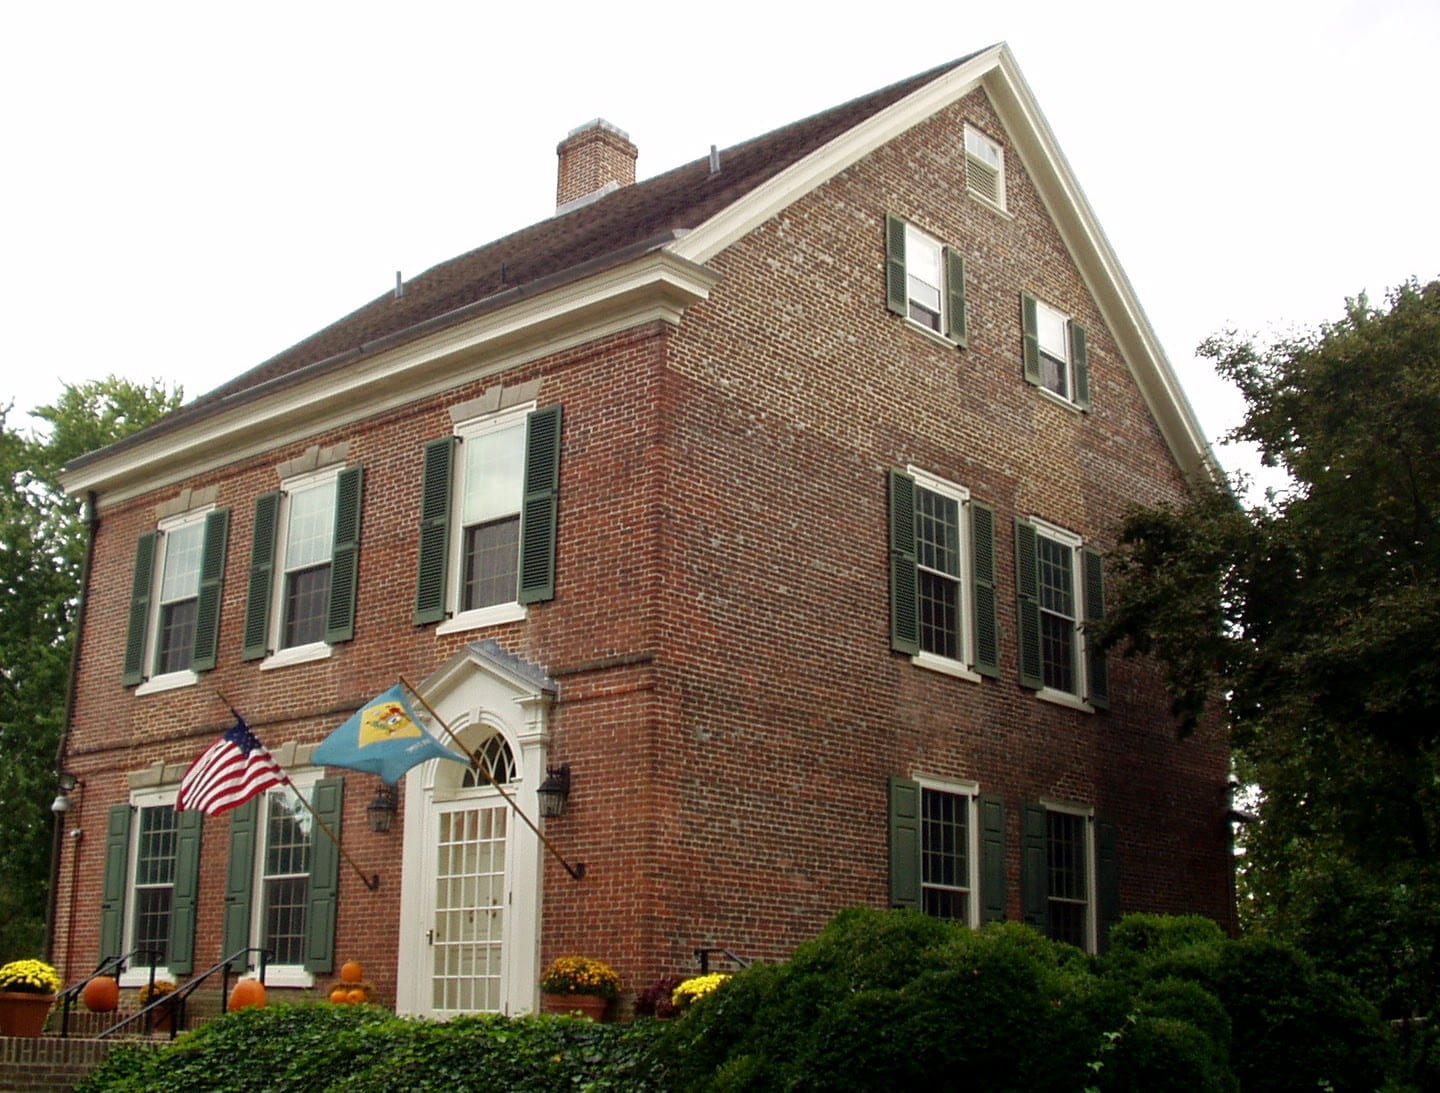 Historic architecture of colonial brick building